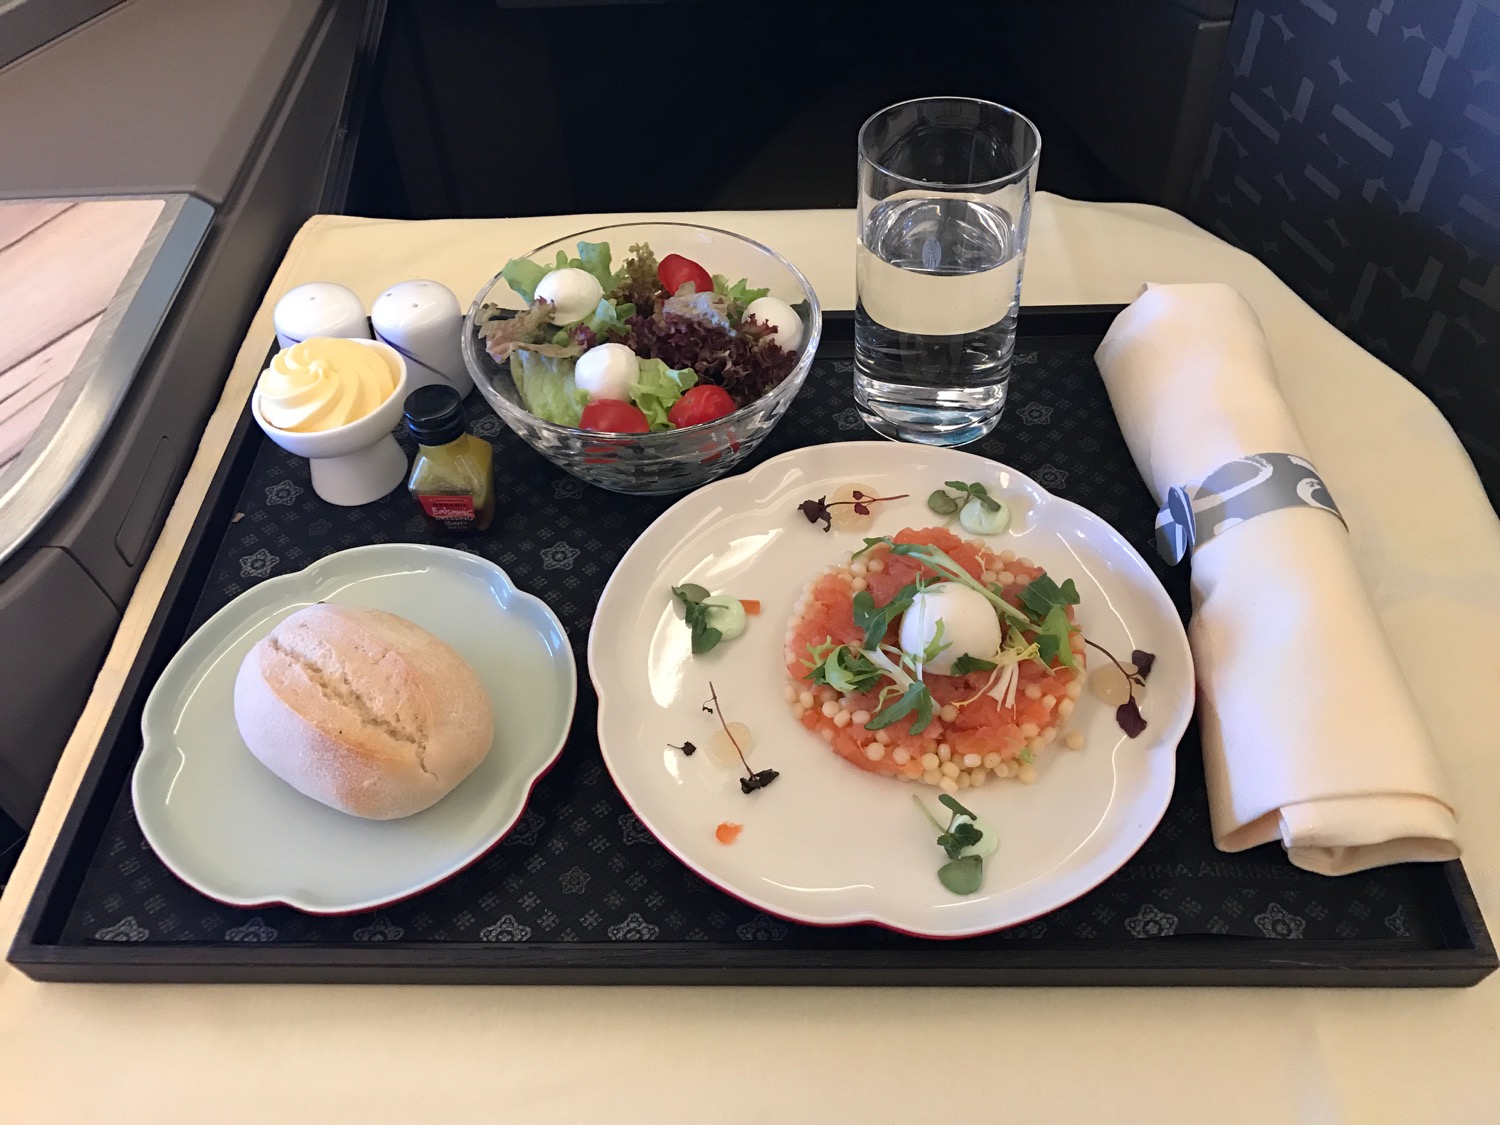 China Airlines A350 Business Class Review - 63